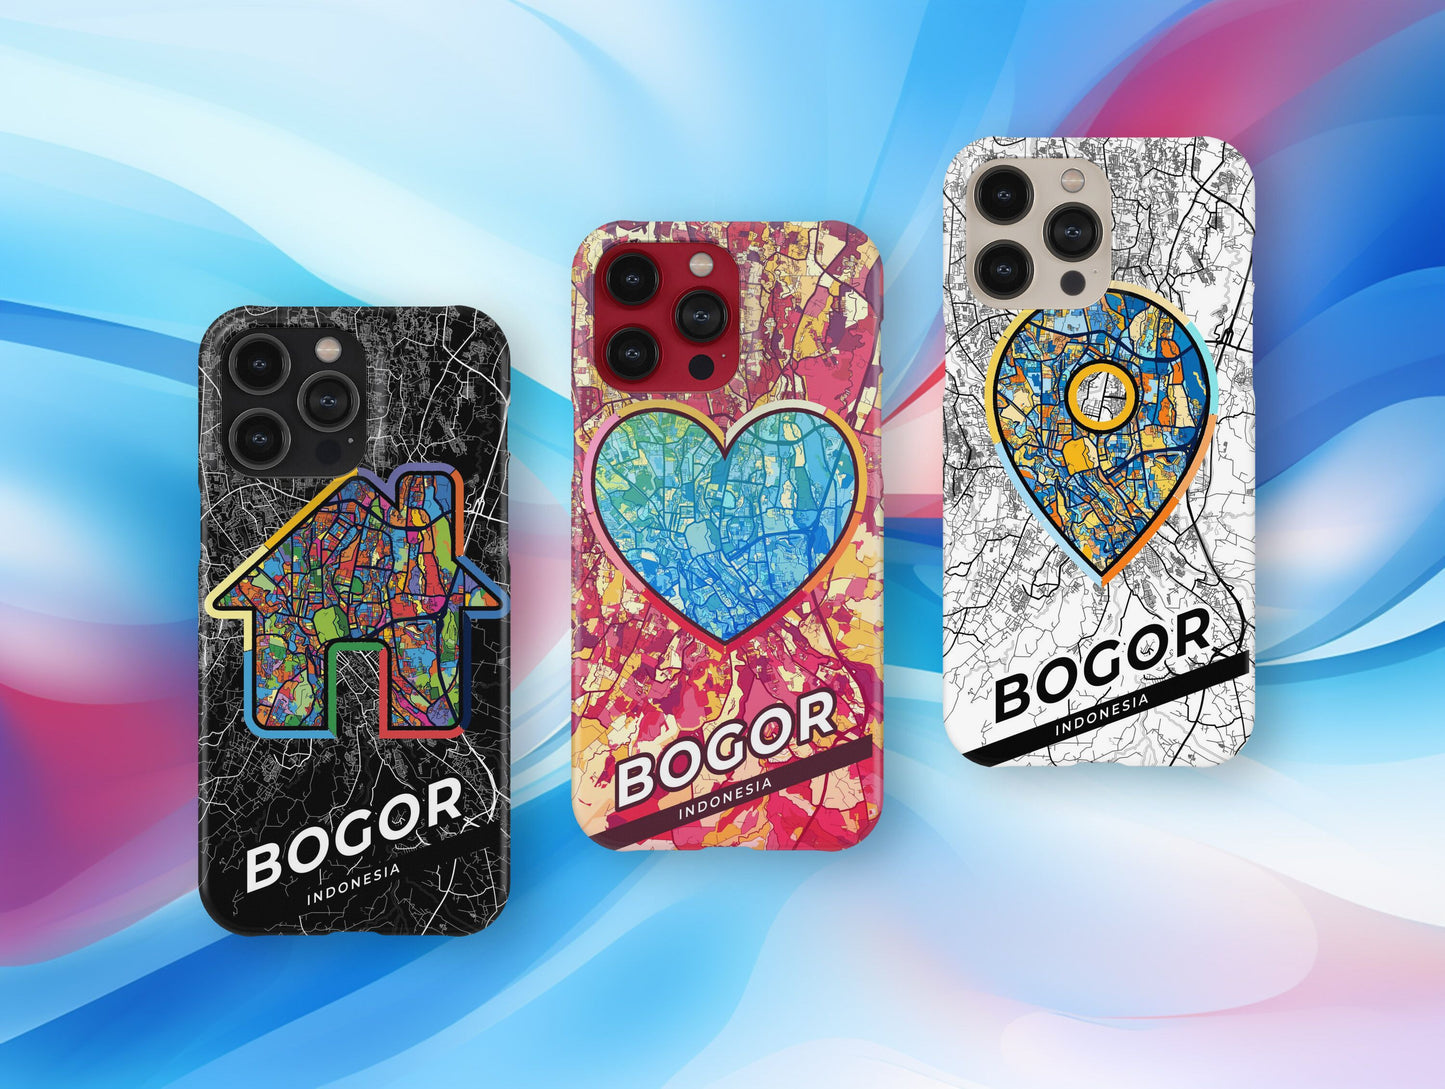 Bogor Indonesia slim phone case with colorful icon. Birthday, wedding or housewarming gift. Couple match cases.